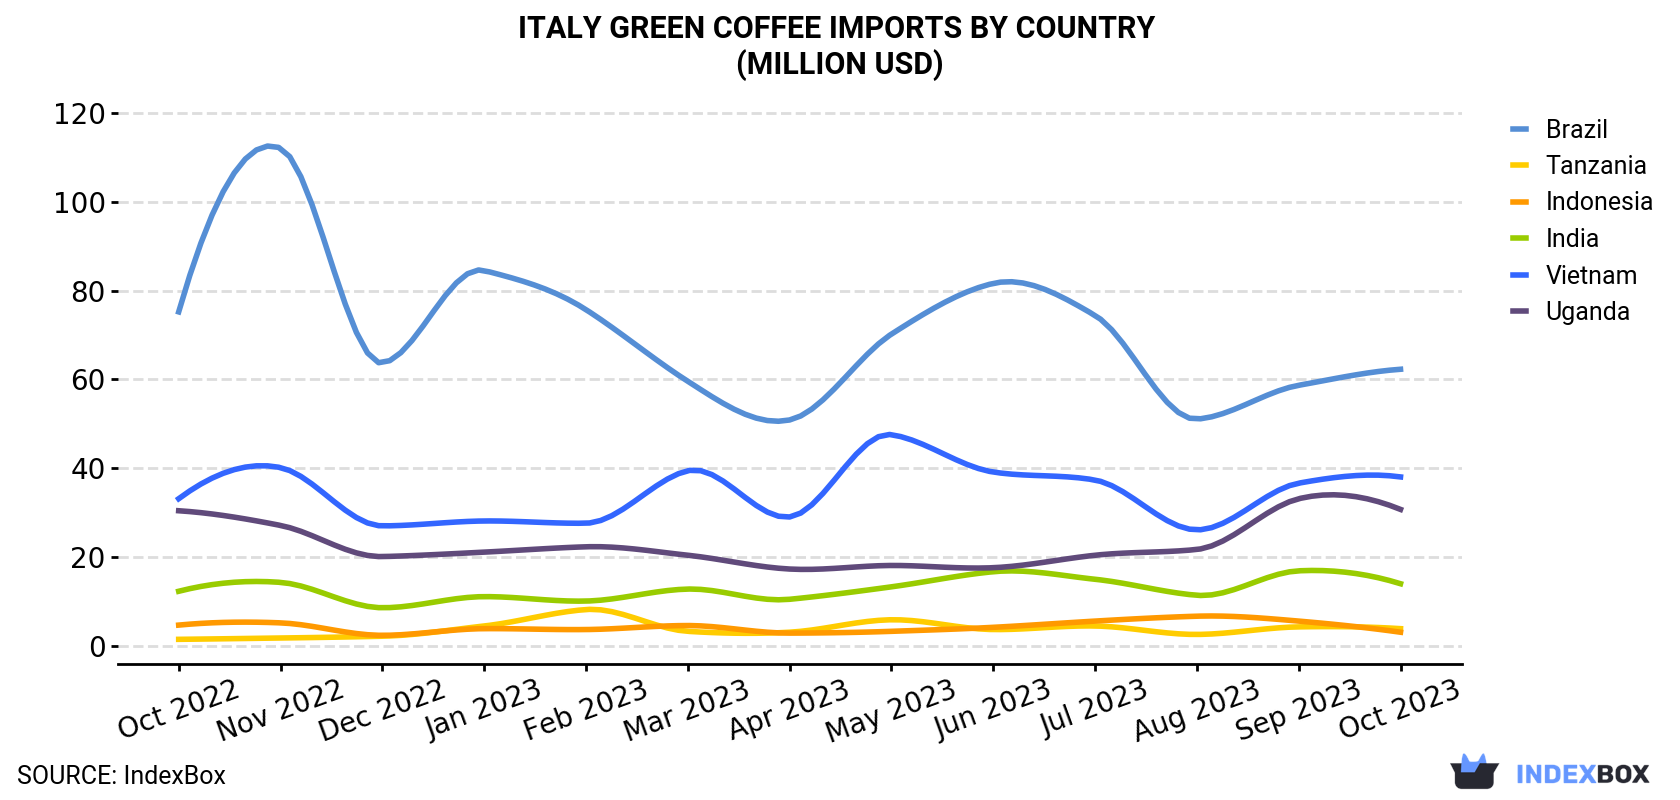 Italy Green Coffee Imports By Country (Million USD)